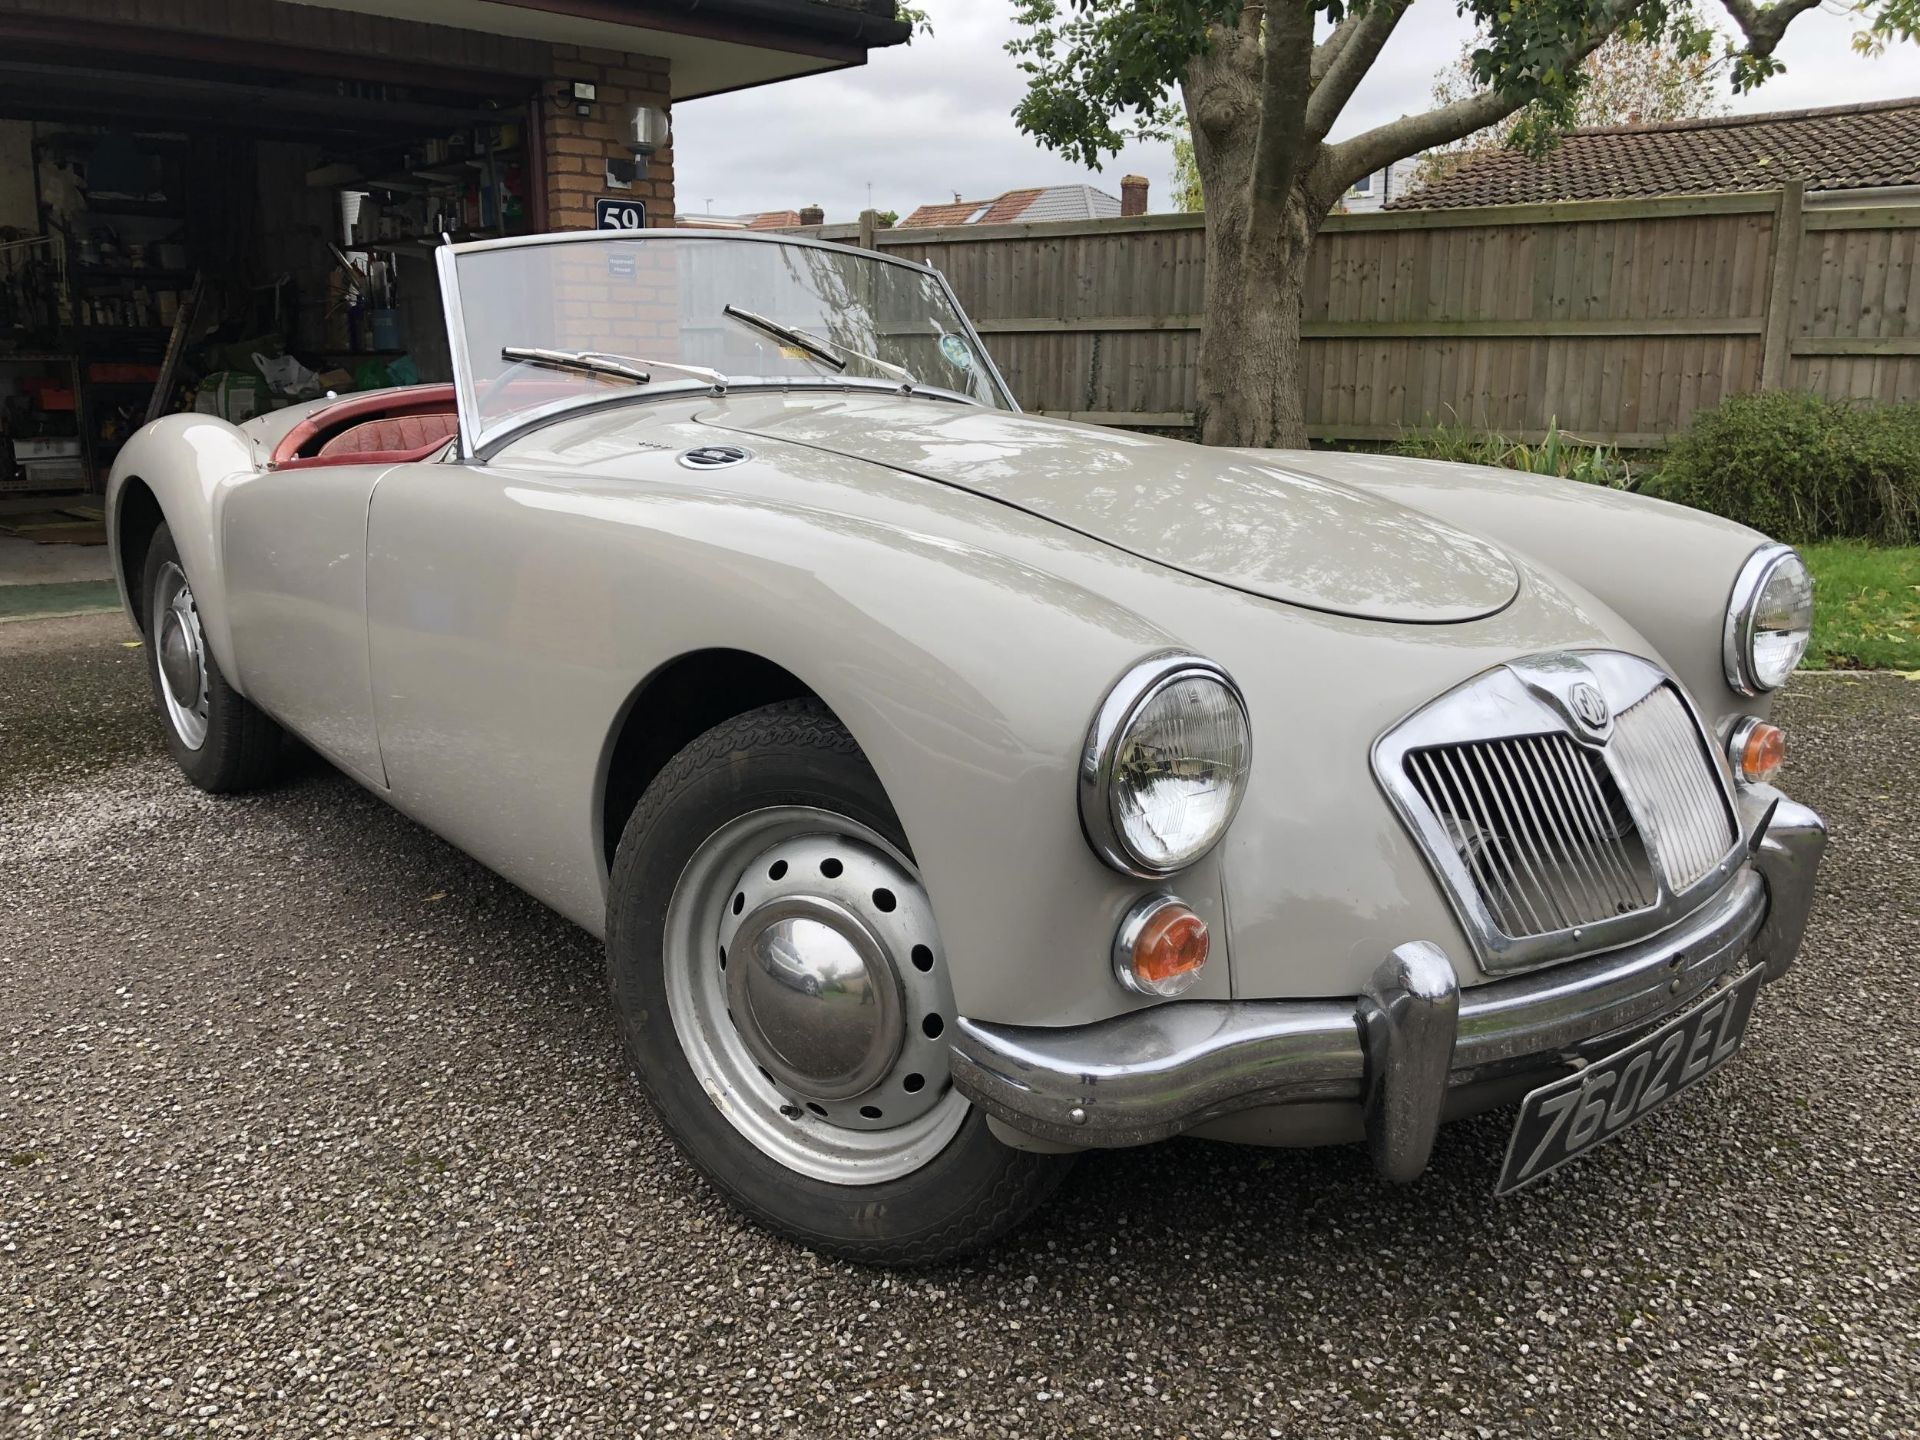 ***Regretfully Withdrawn*** 1960 MG A 1600 Roadster Registration number 7602 EL Chassis number